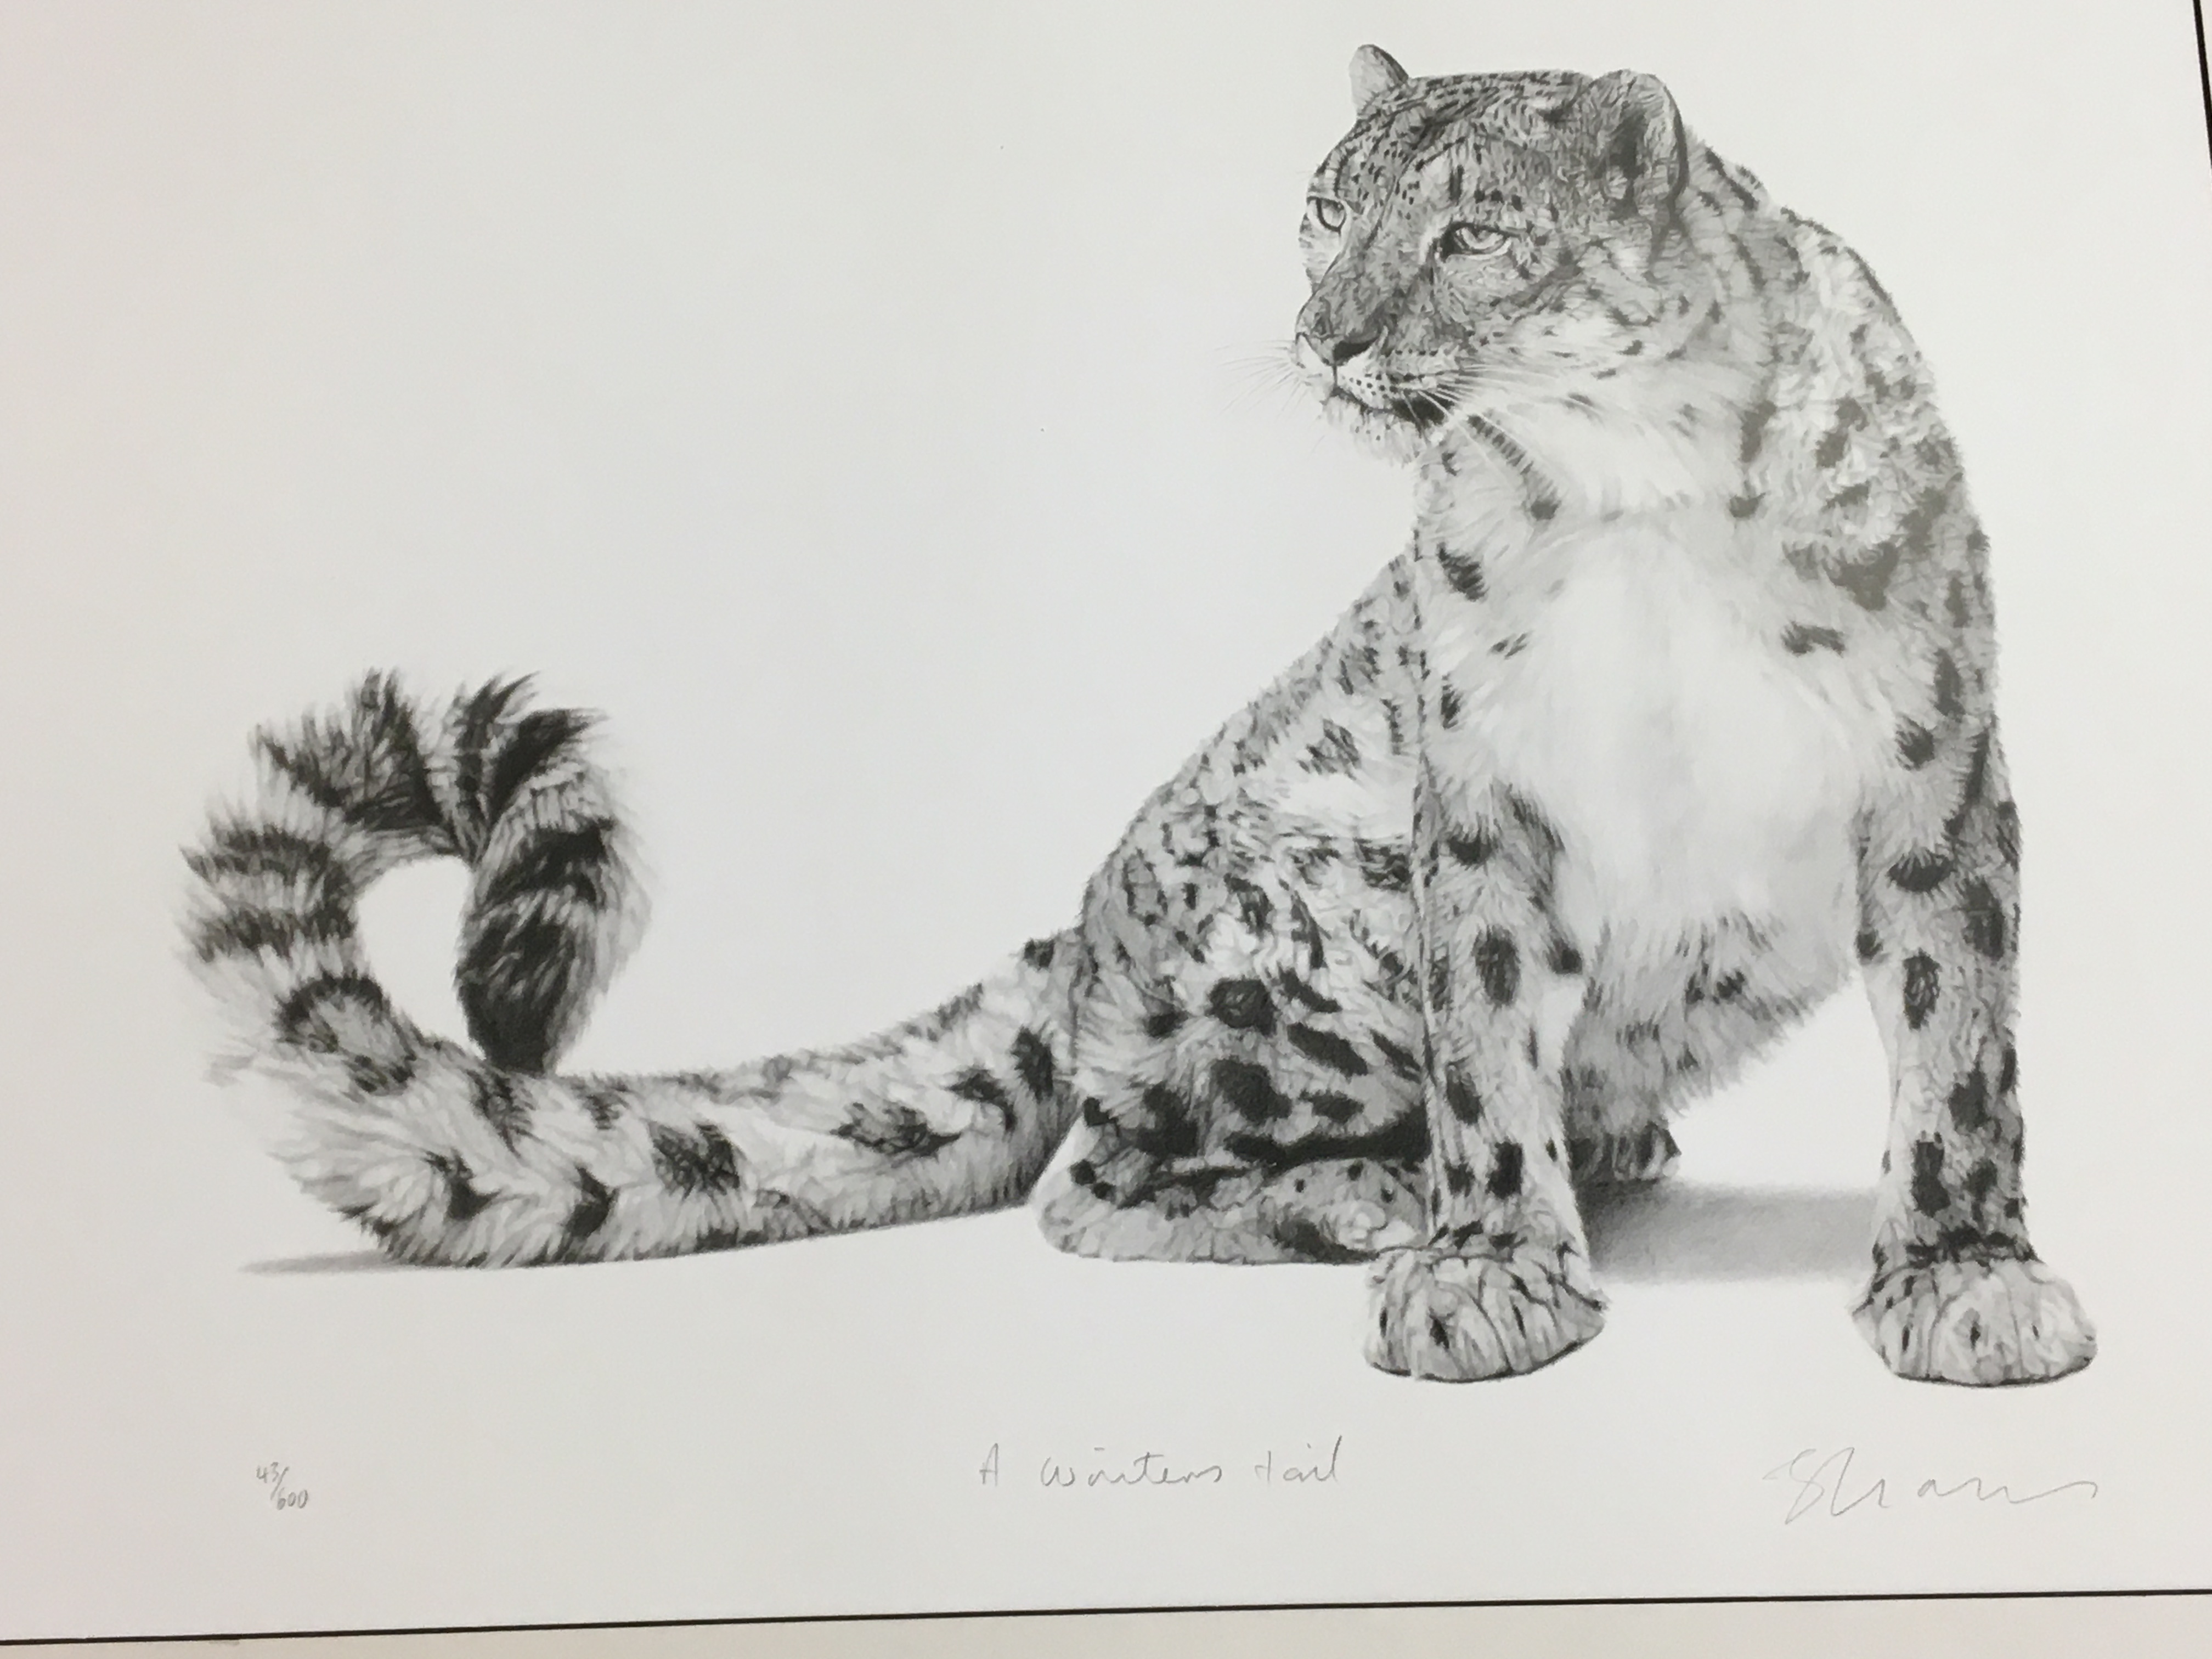 Limited Edition print of a Snow Leopard, 43/600, 23" x 18"